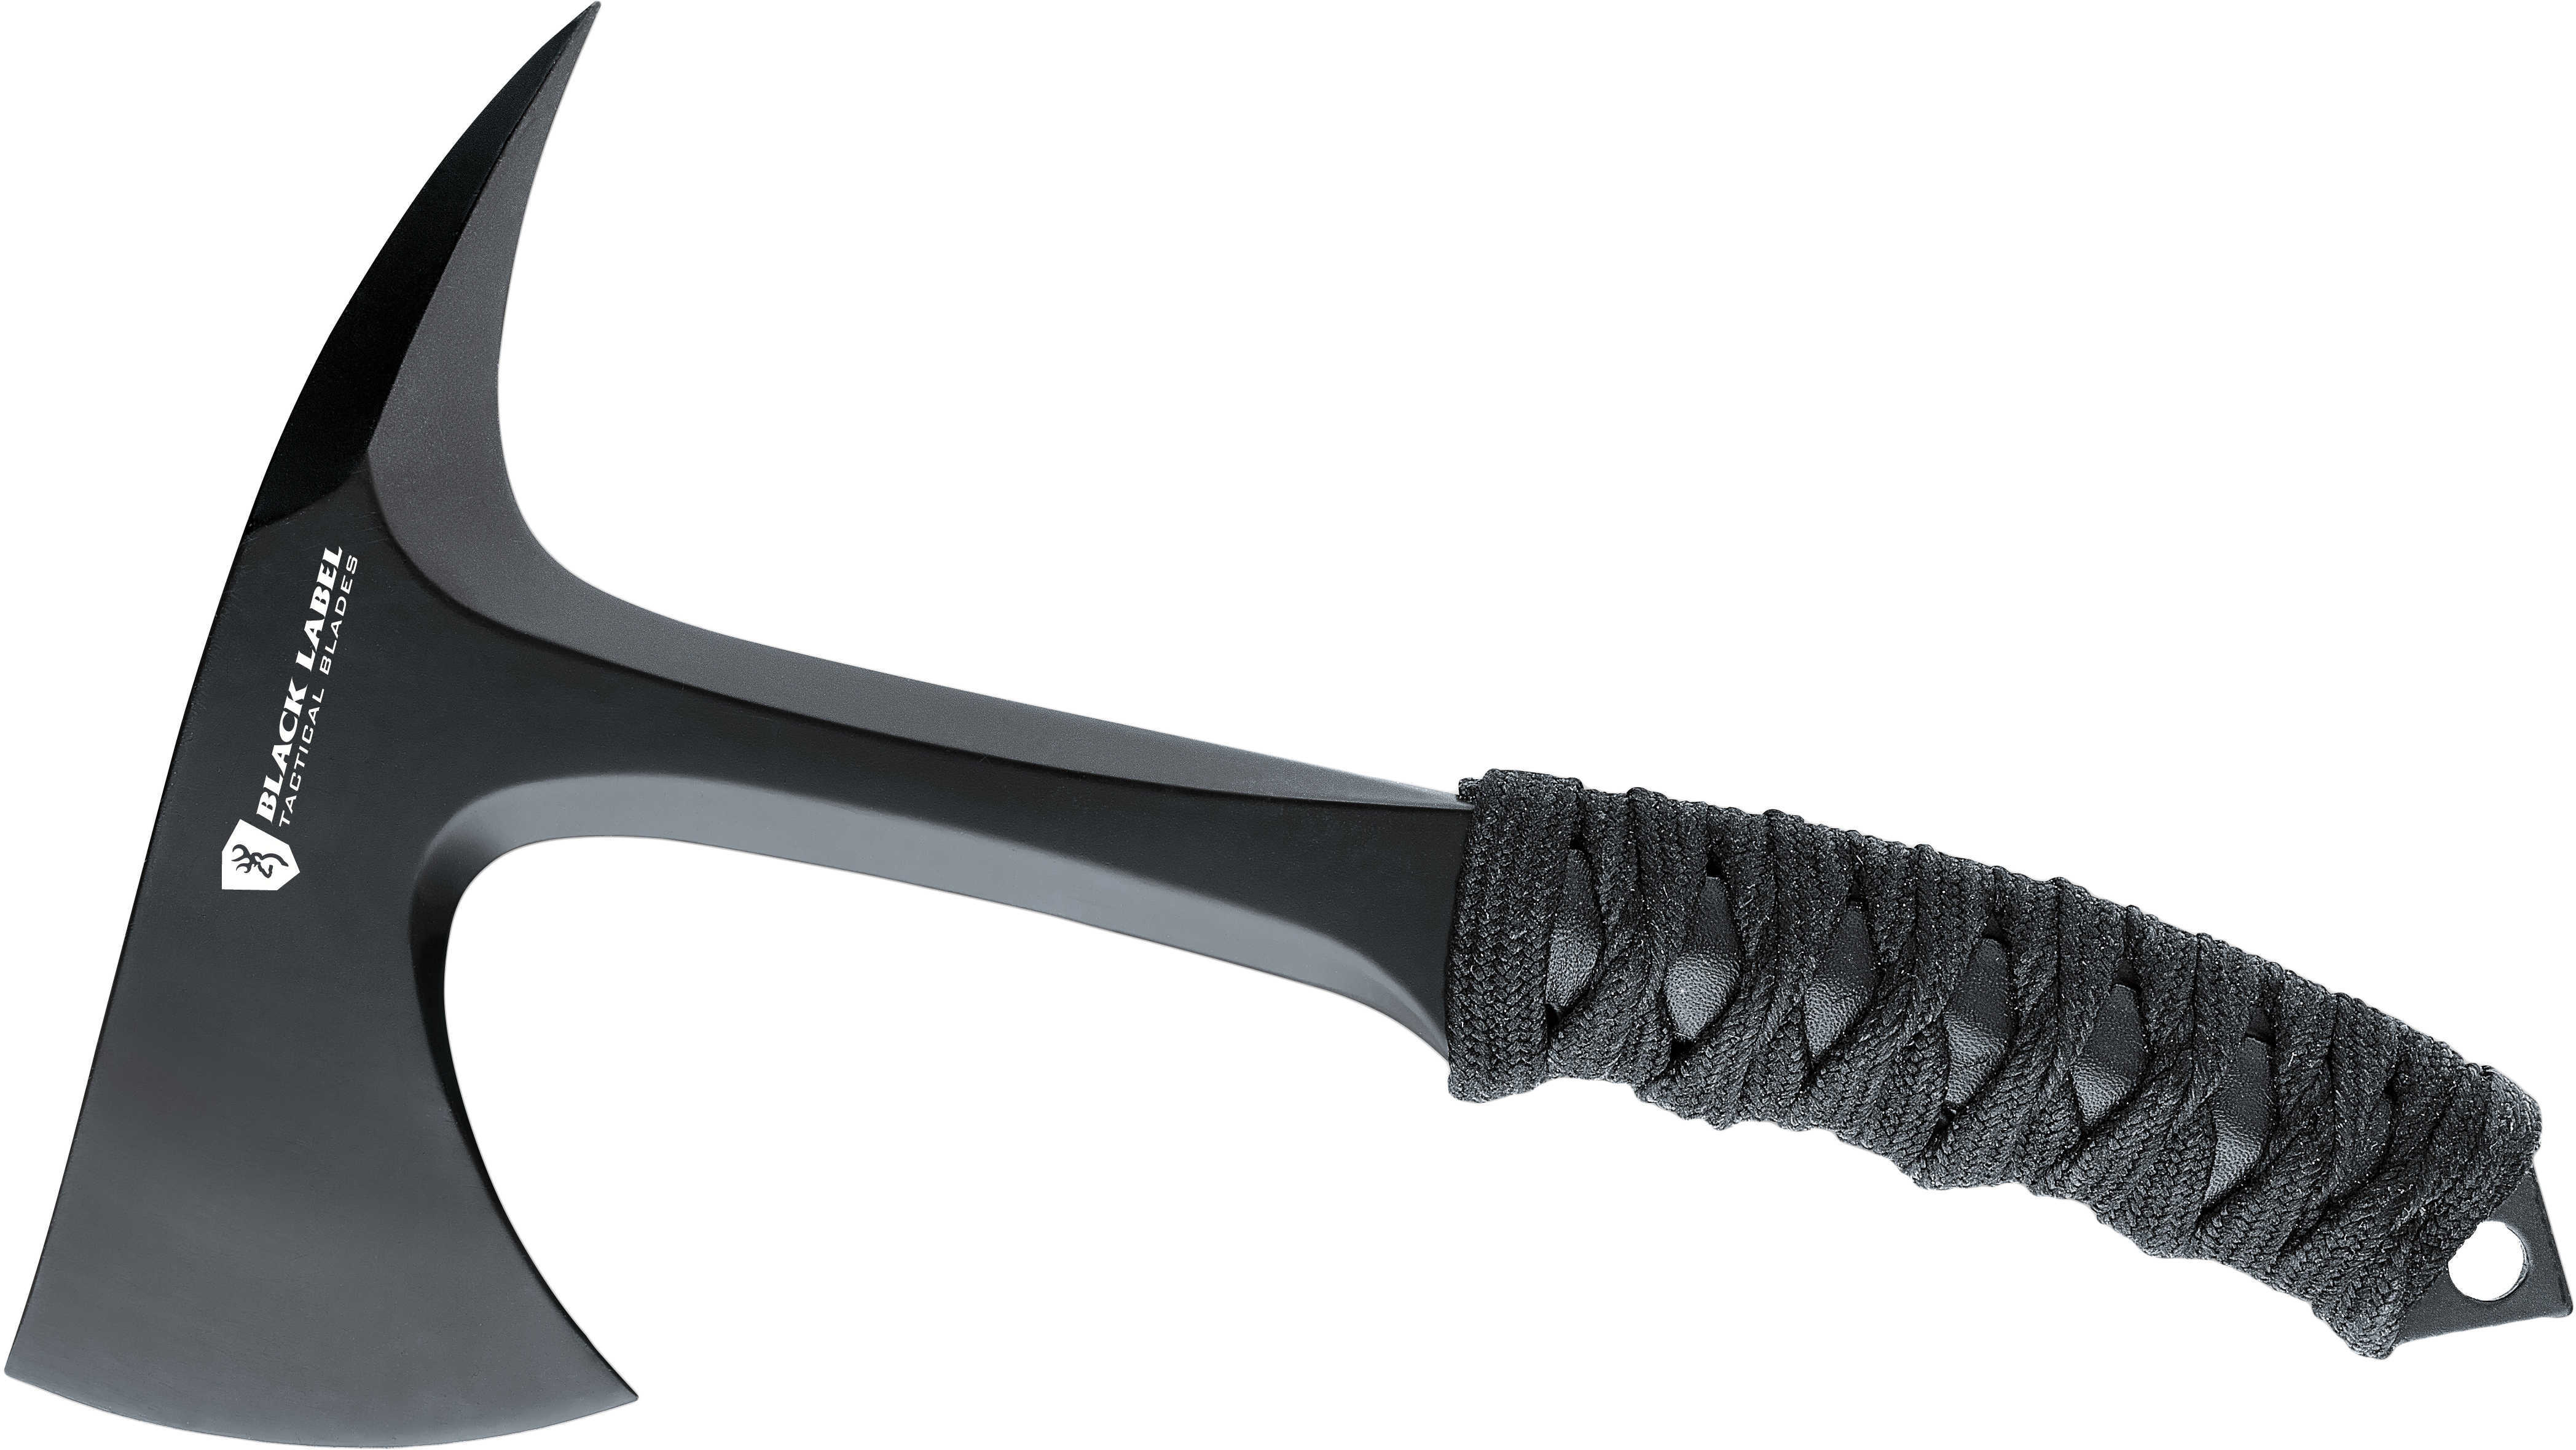 Browning Tactical Tomahawk 110Bl Shock N Awe Md: 320110Bl